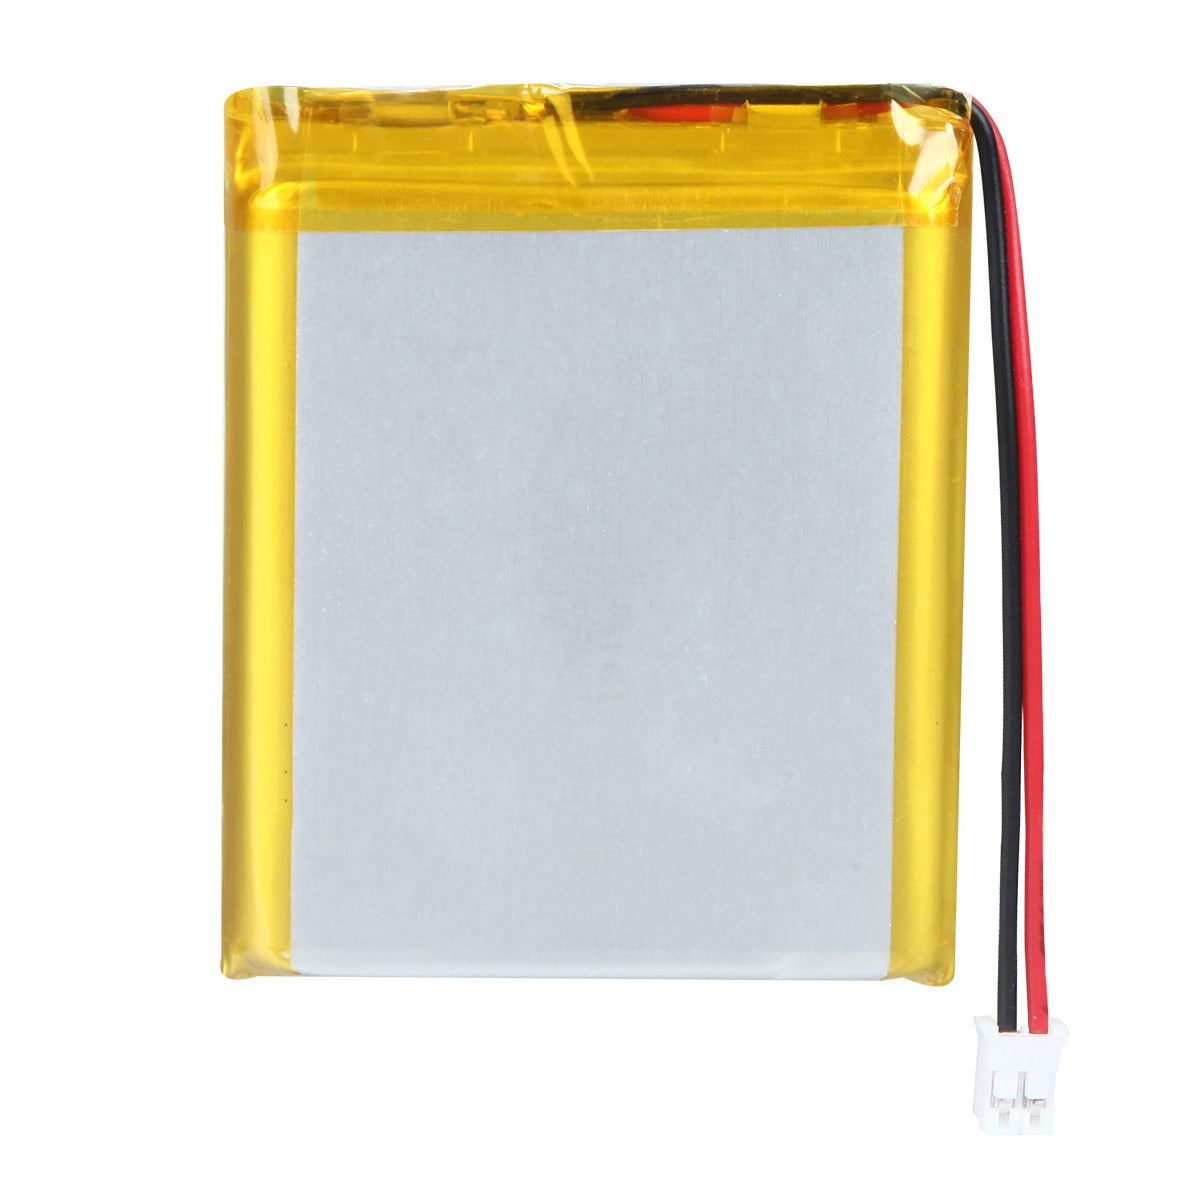 3.7V 3300mAh 105060 Rechargeable Lithium Polymer Battery